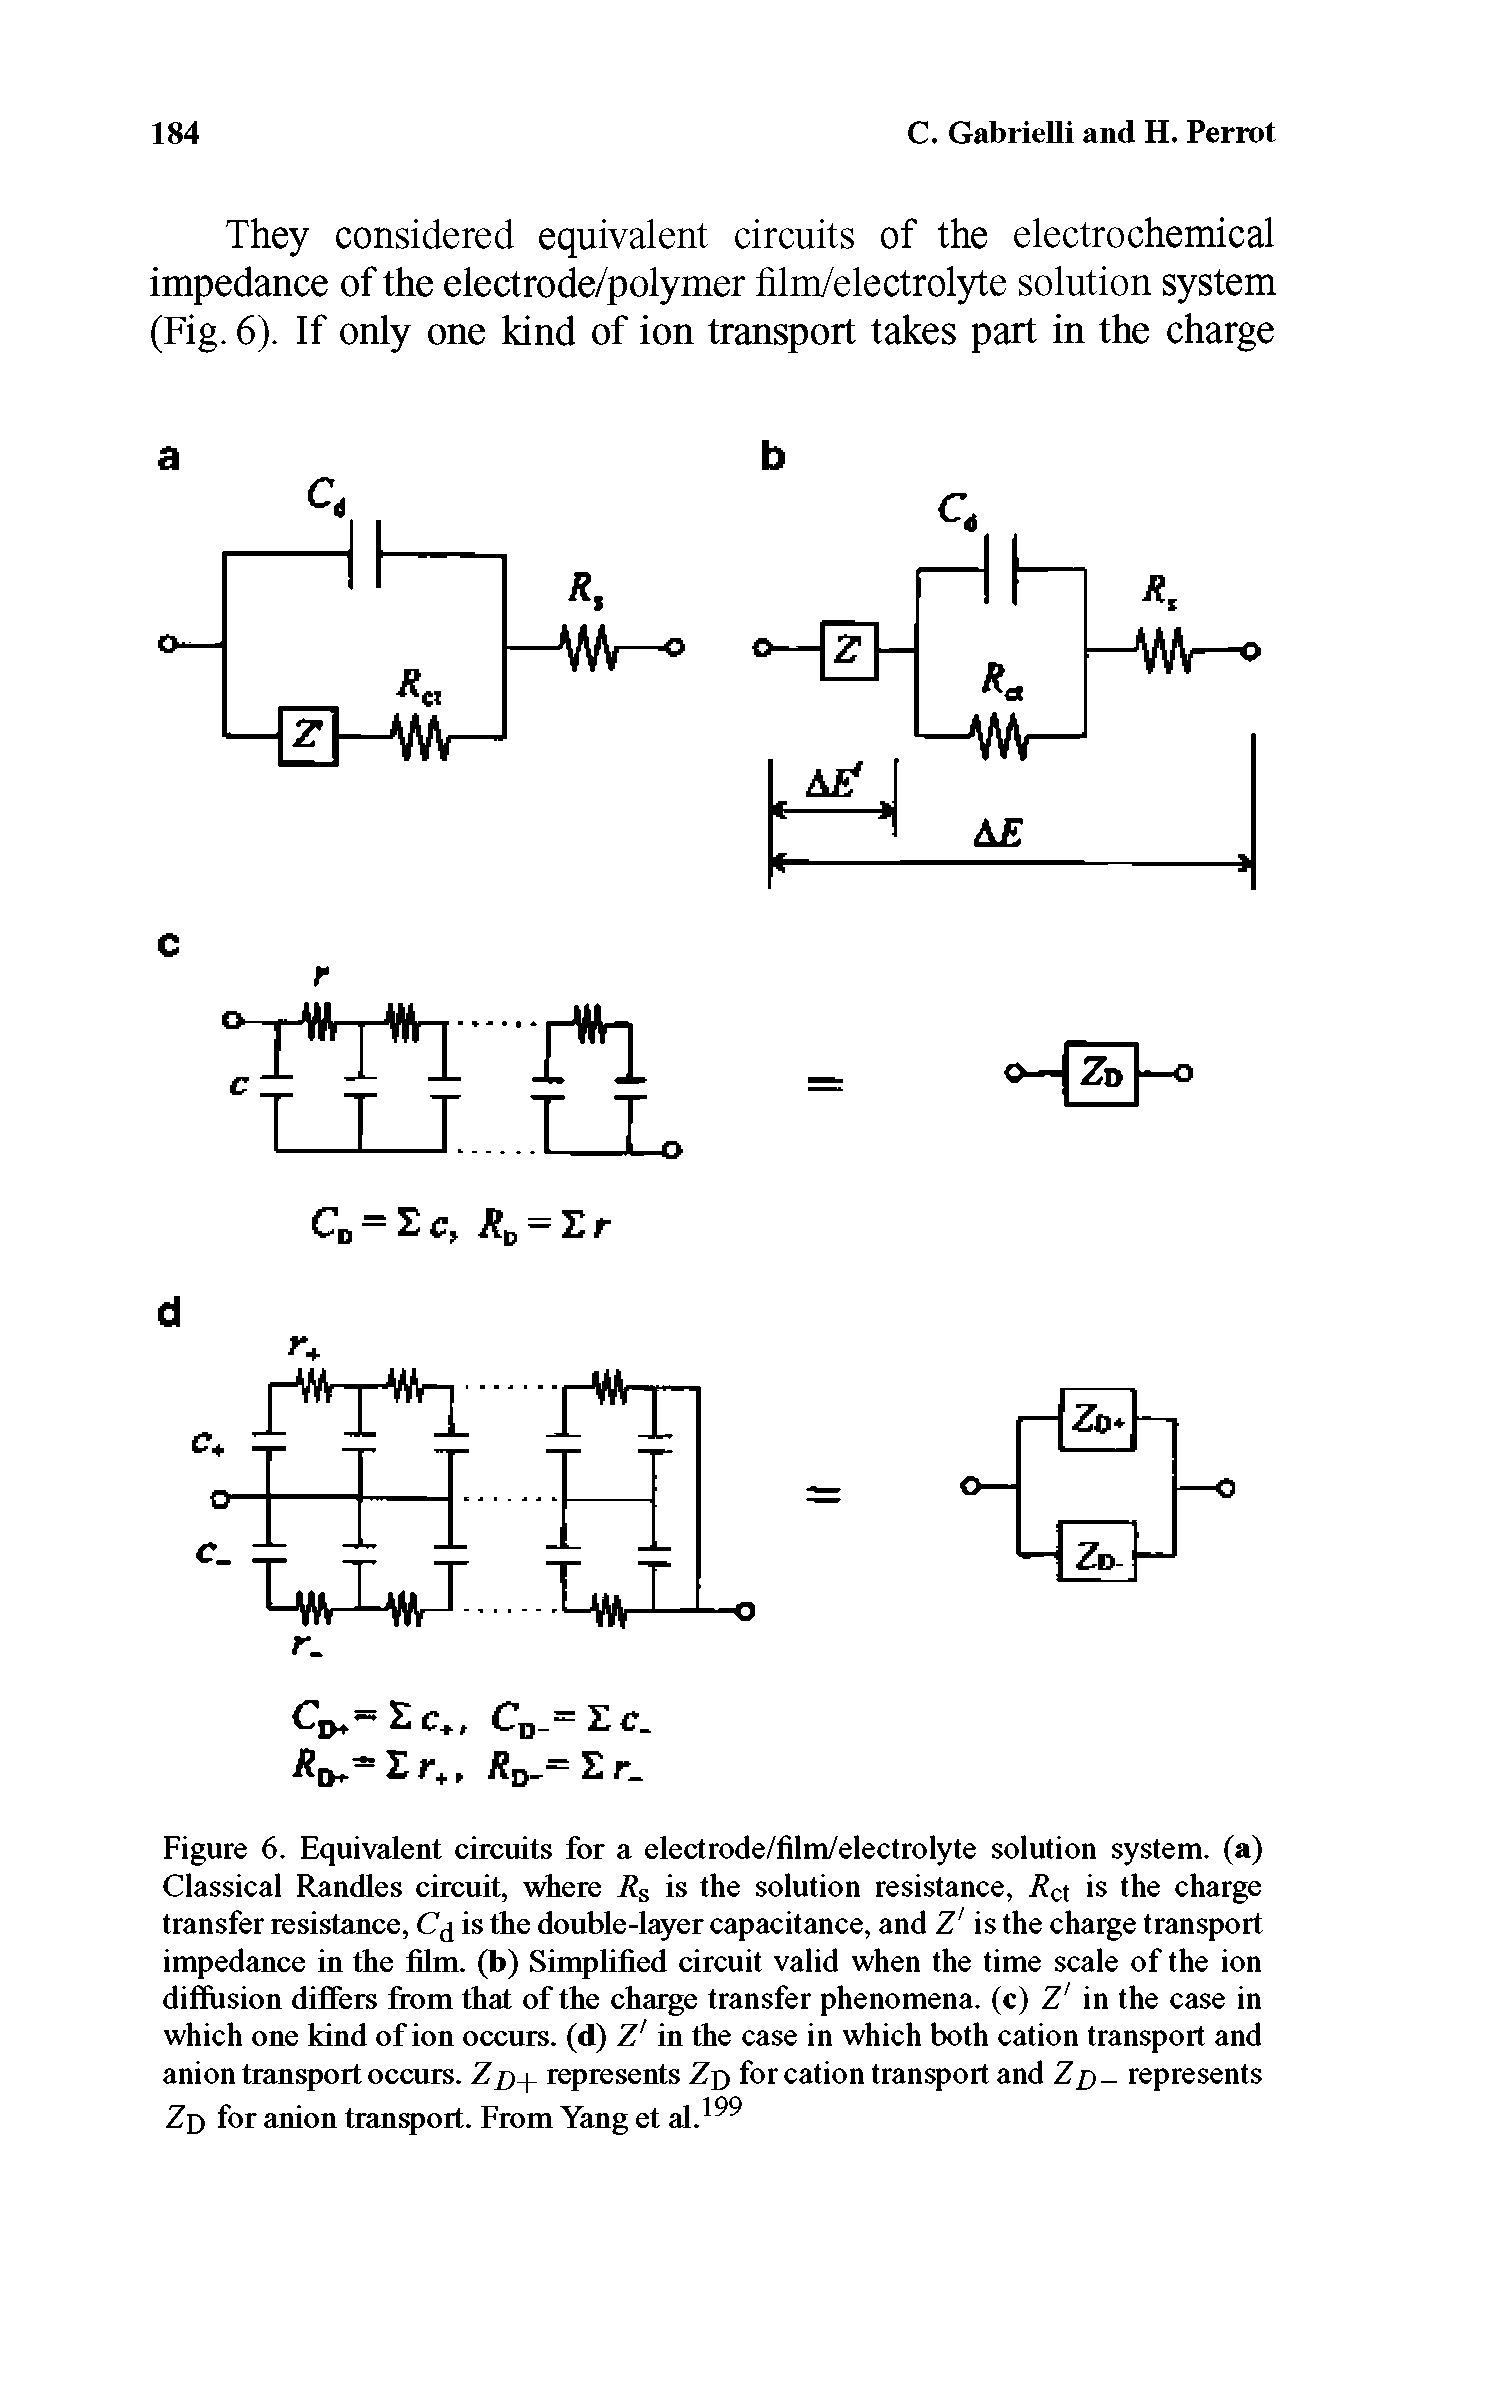 Figure 6. Equivalent circuits for a electrode/film/electrolyte solution system, (a) Classical Randles circuit, where Rs is the solution resistance, l ct is the charge transfer resistance, is the double-layer capacitance, and Z is the charge transport impedance in the film, (b) Simplified circuit valid when the time scale of the ion diffusion differs from that of the charge transfer phenomena, (c) Z in the case in which one kind of ion occurs, (d) Z in the case in which both cation transport and anion transport occurs. Z >+ represents Zp for cation transport and Z/j represents Zd for anion transport. From Yang et al. ...